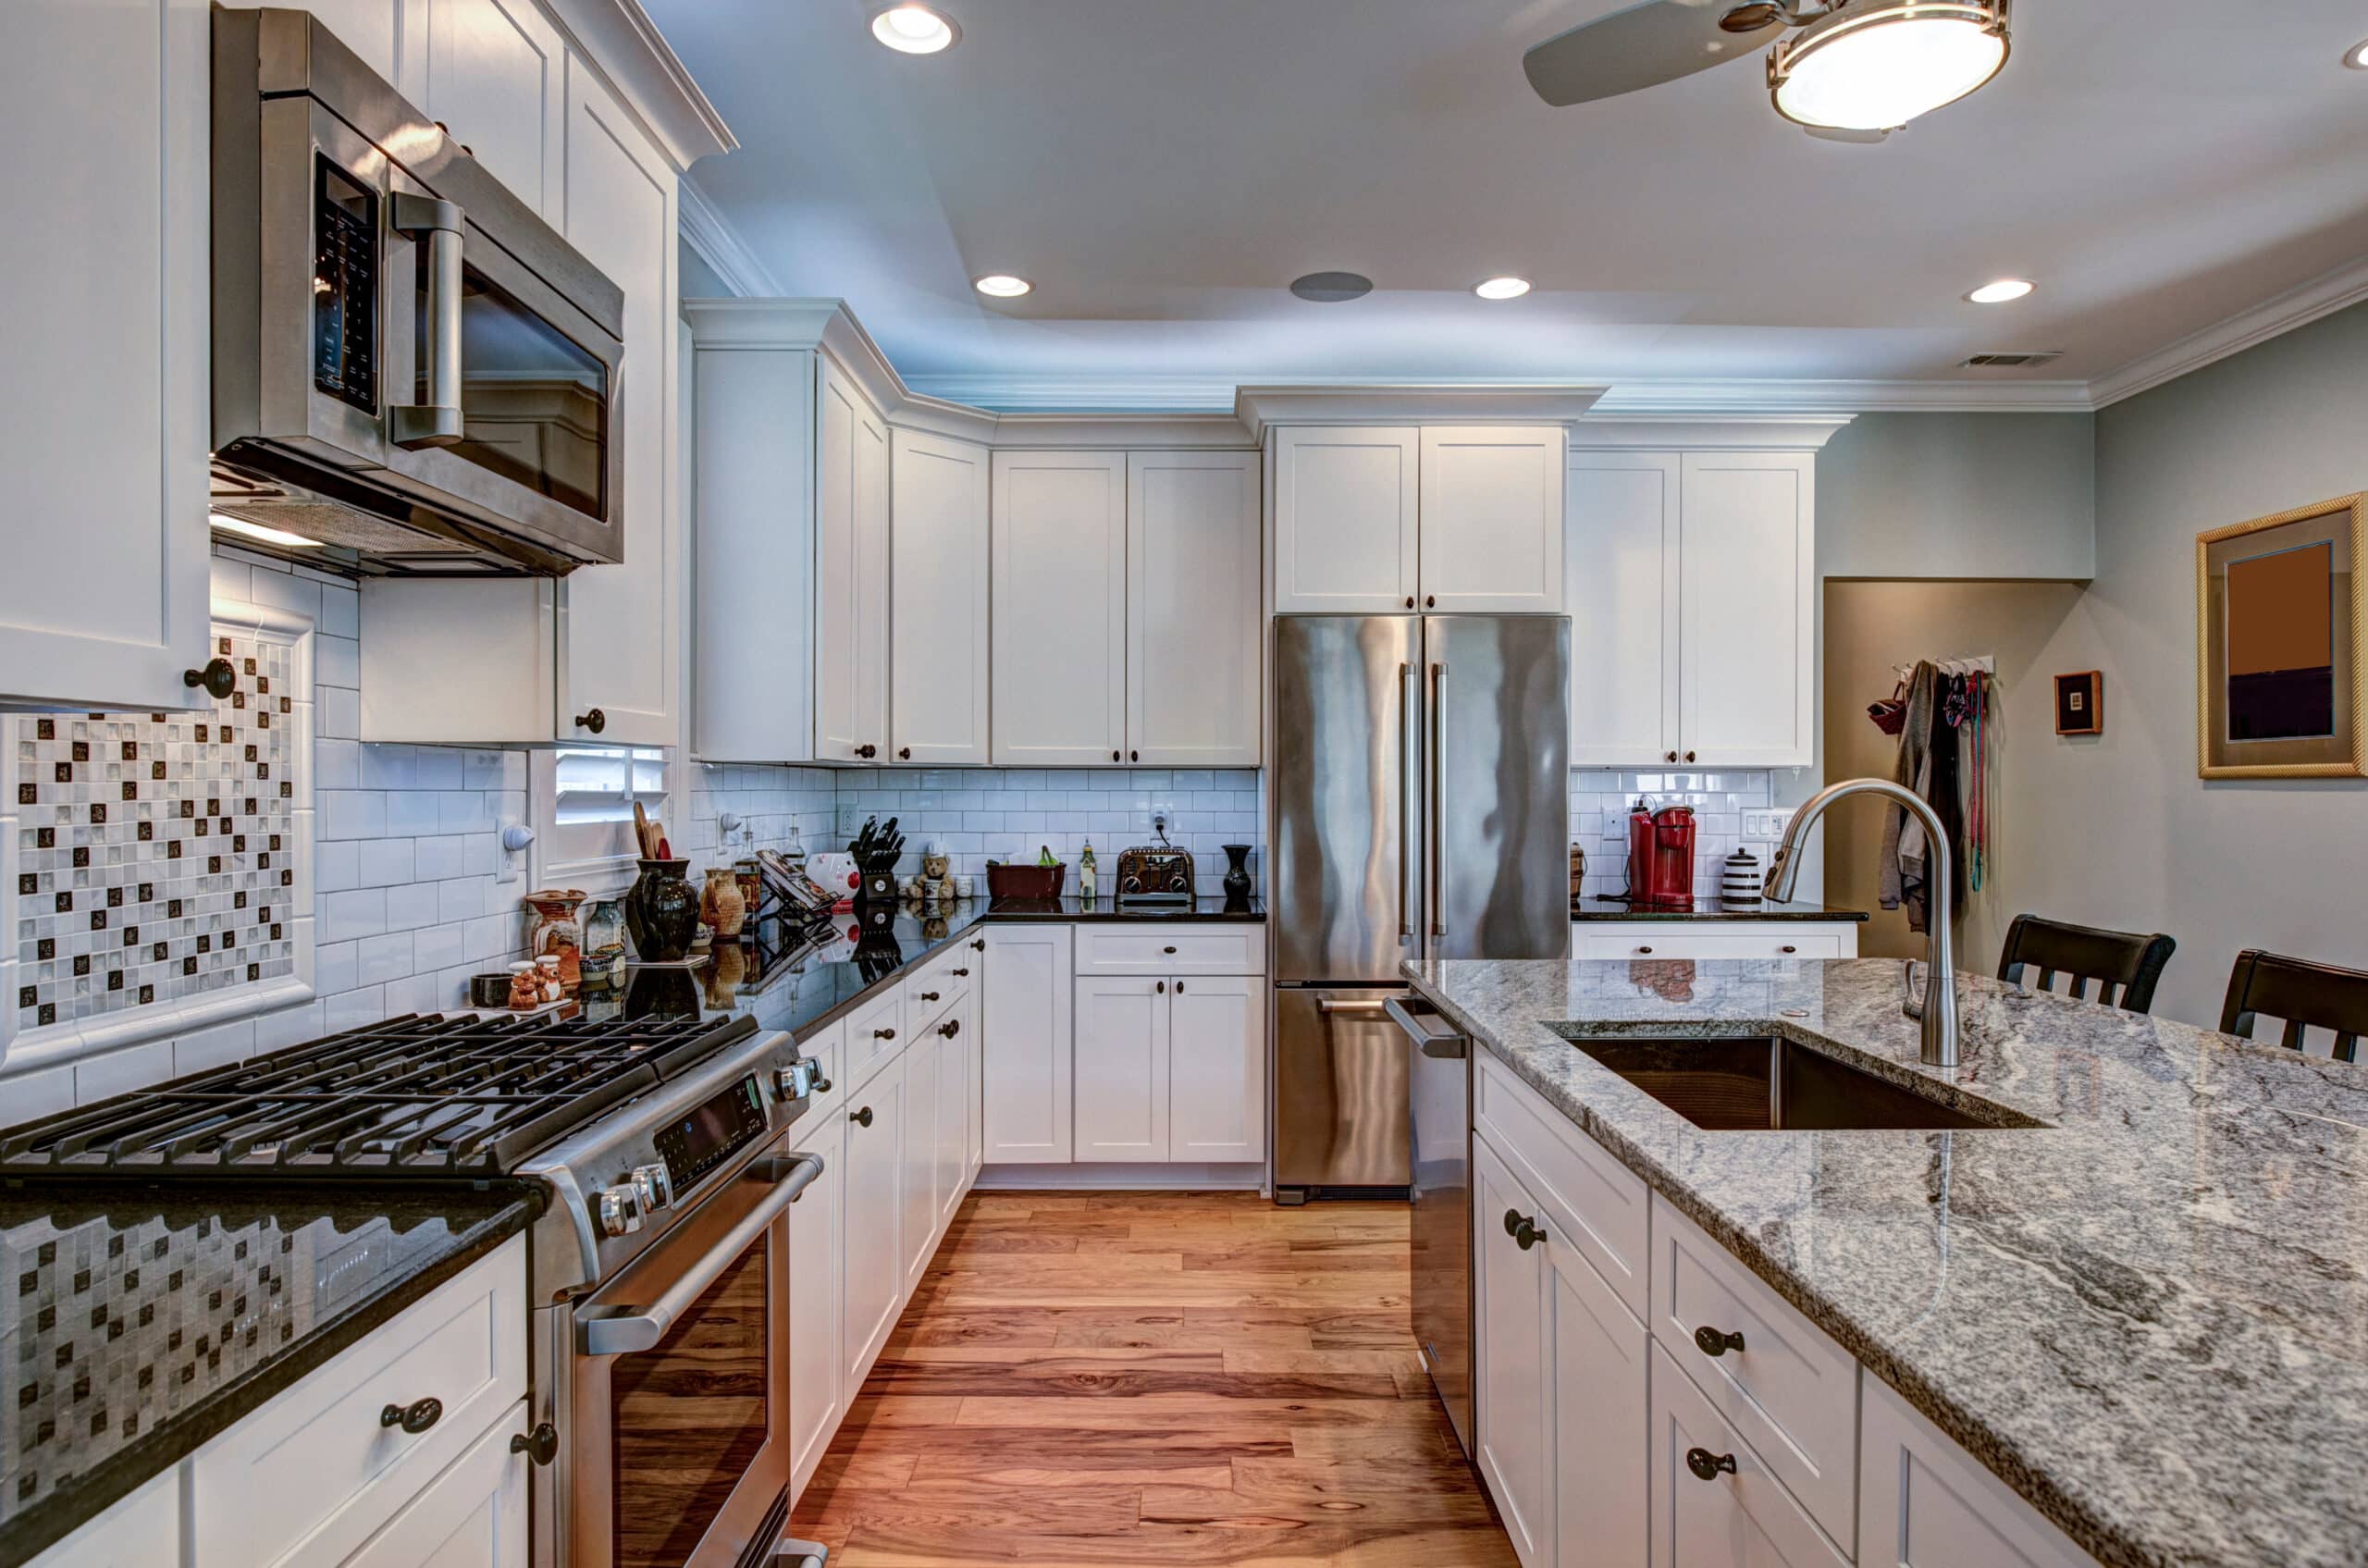 High-end luxury kitchen with granite countertops and white cabinets.